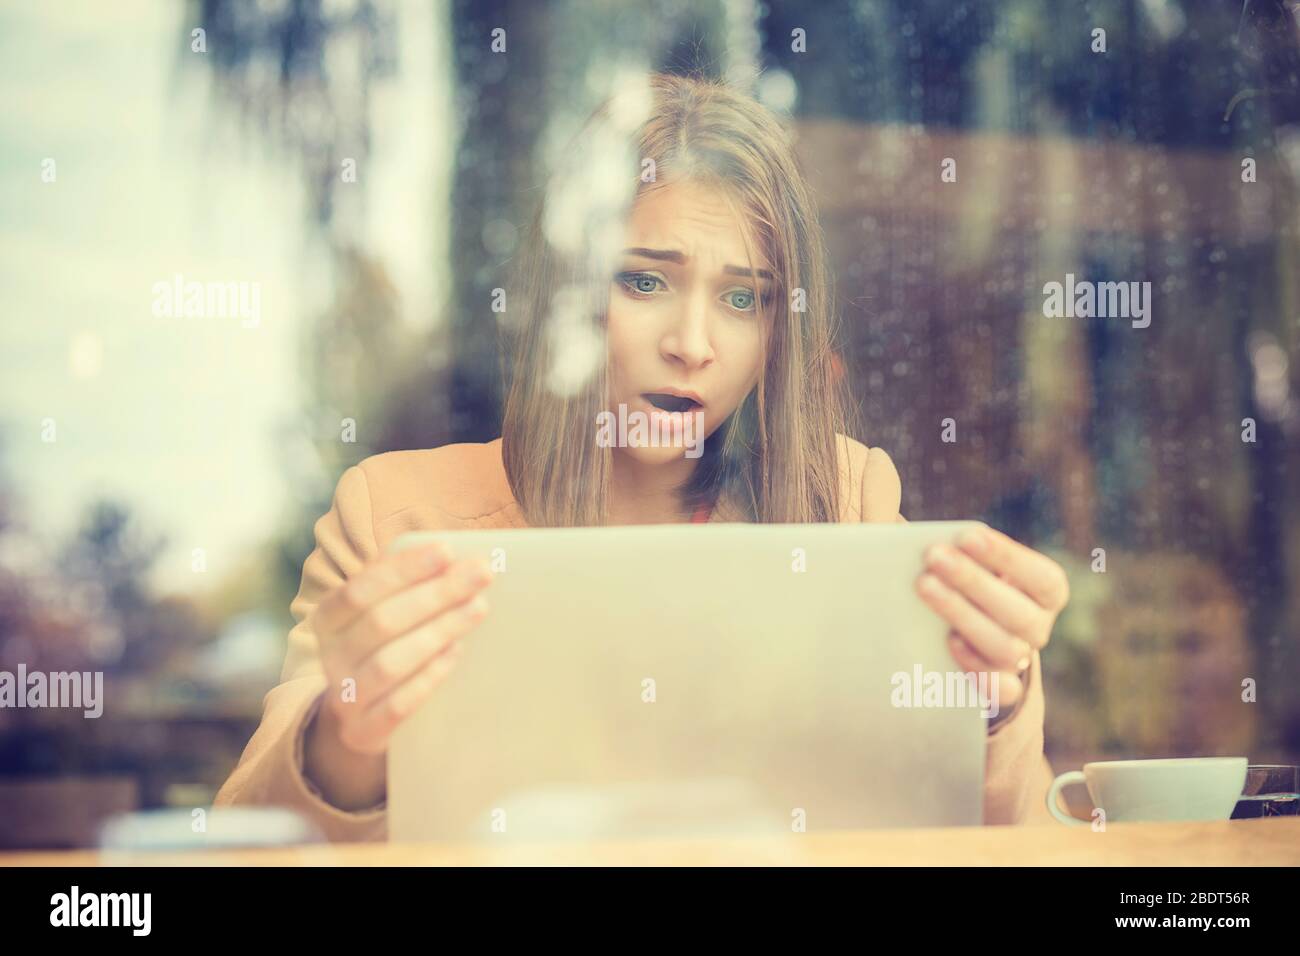 Shocked woman holding computer, laptop tablet screen looking surprised in coffee shop Stock Photo